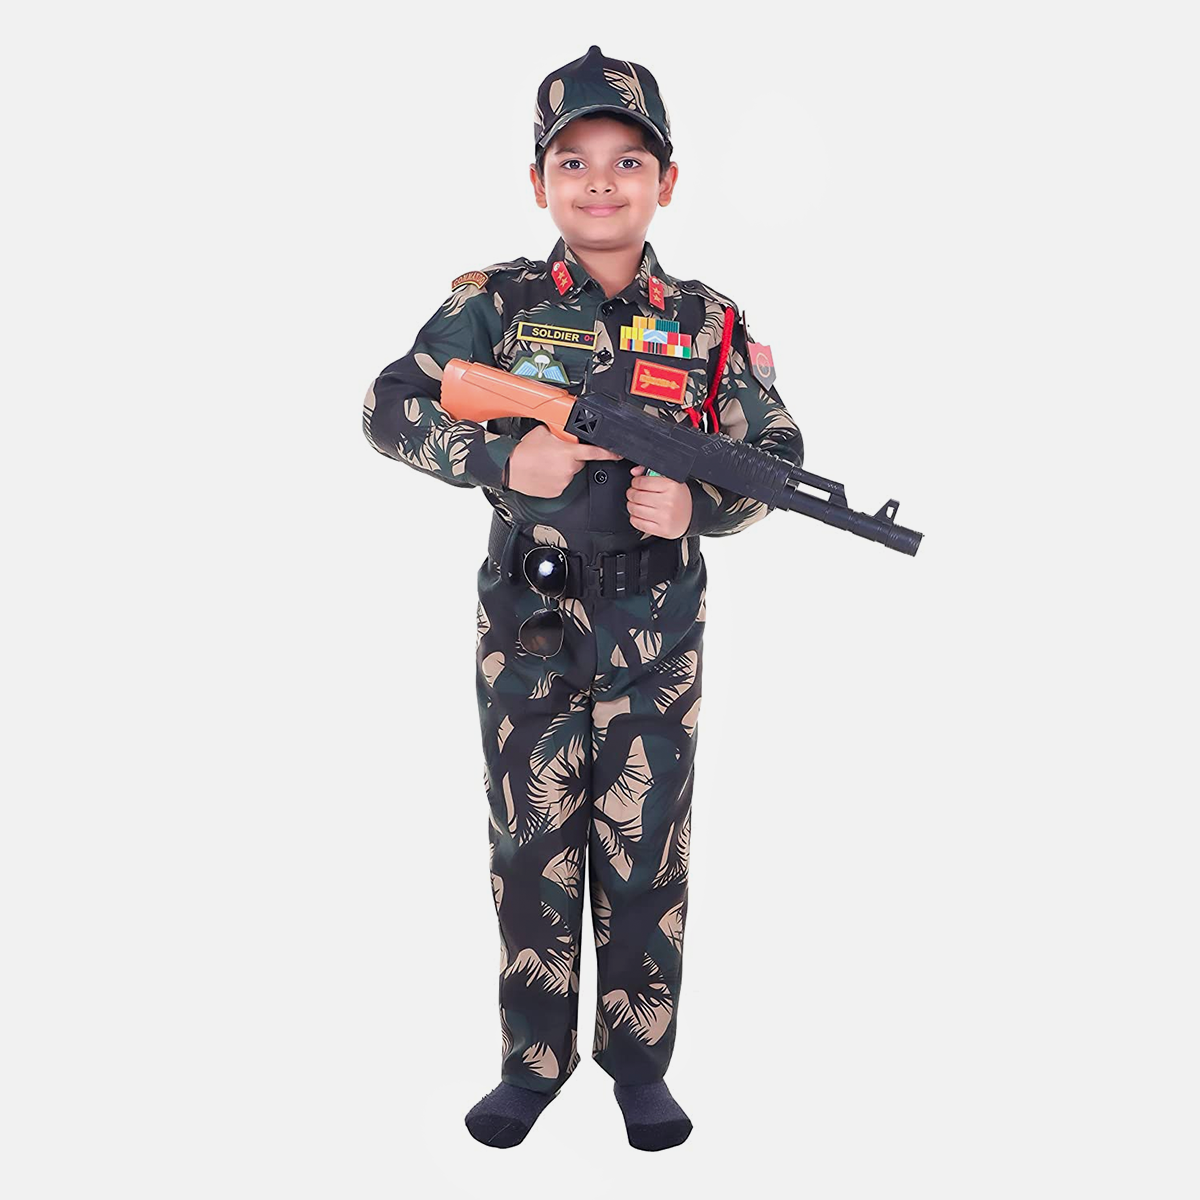 Army Soldier Costume - Kids